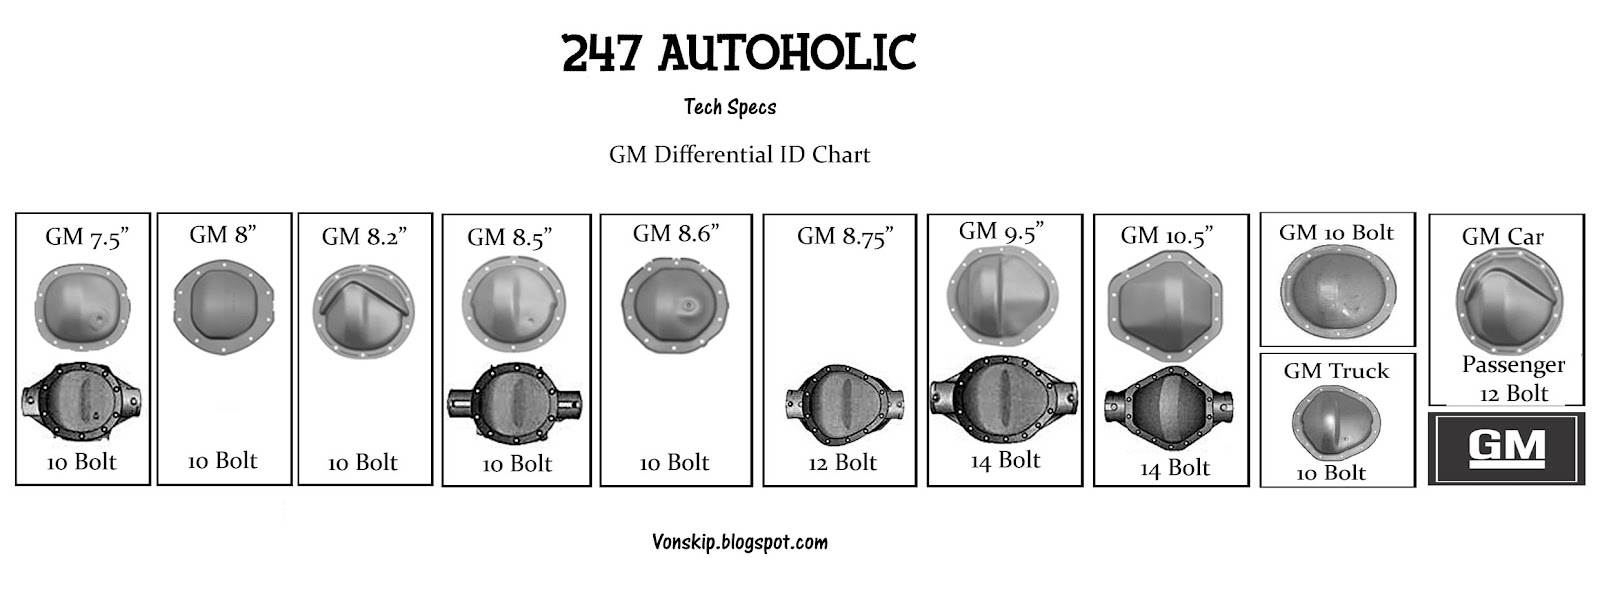 Ford Rear End Identification Chart - Simple Steps For Accurate Differential...